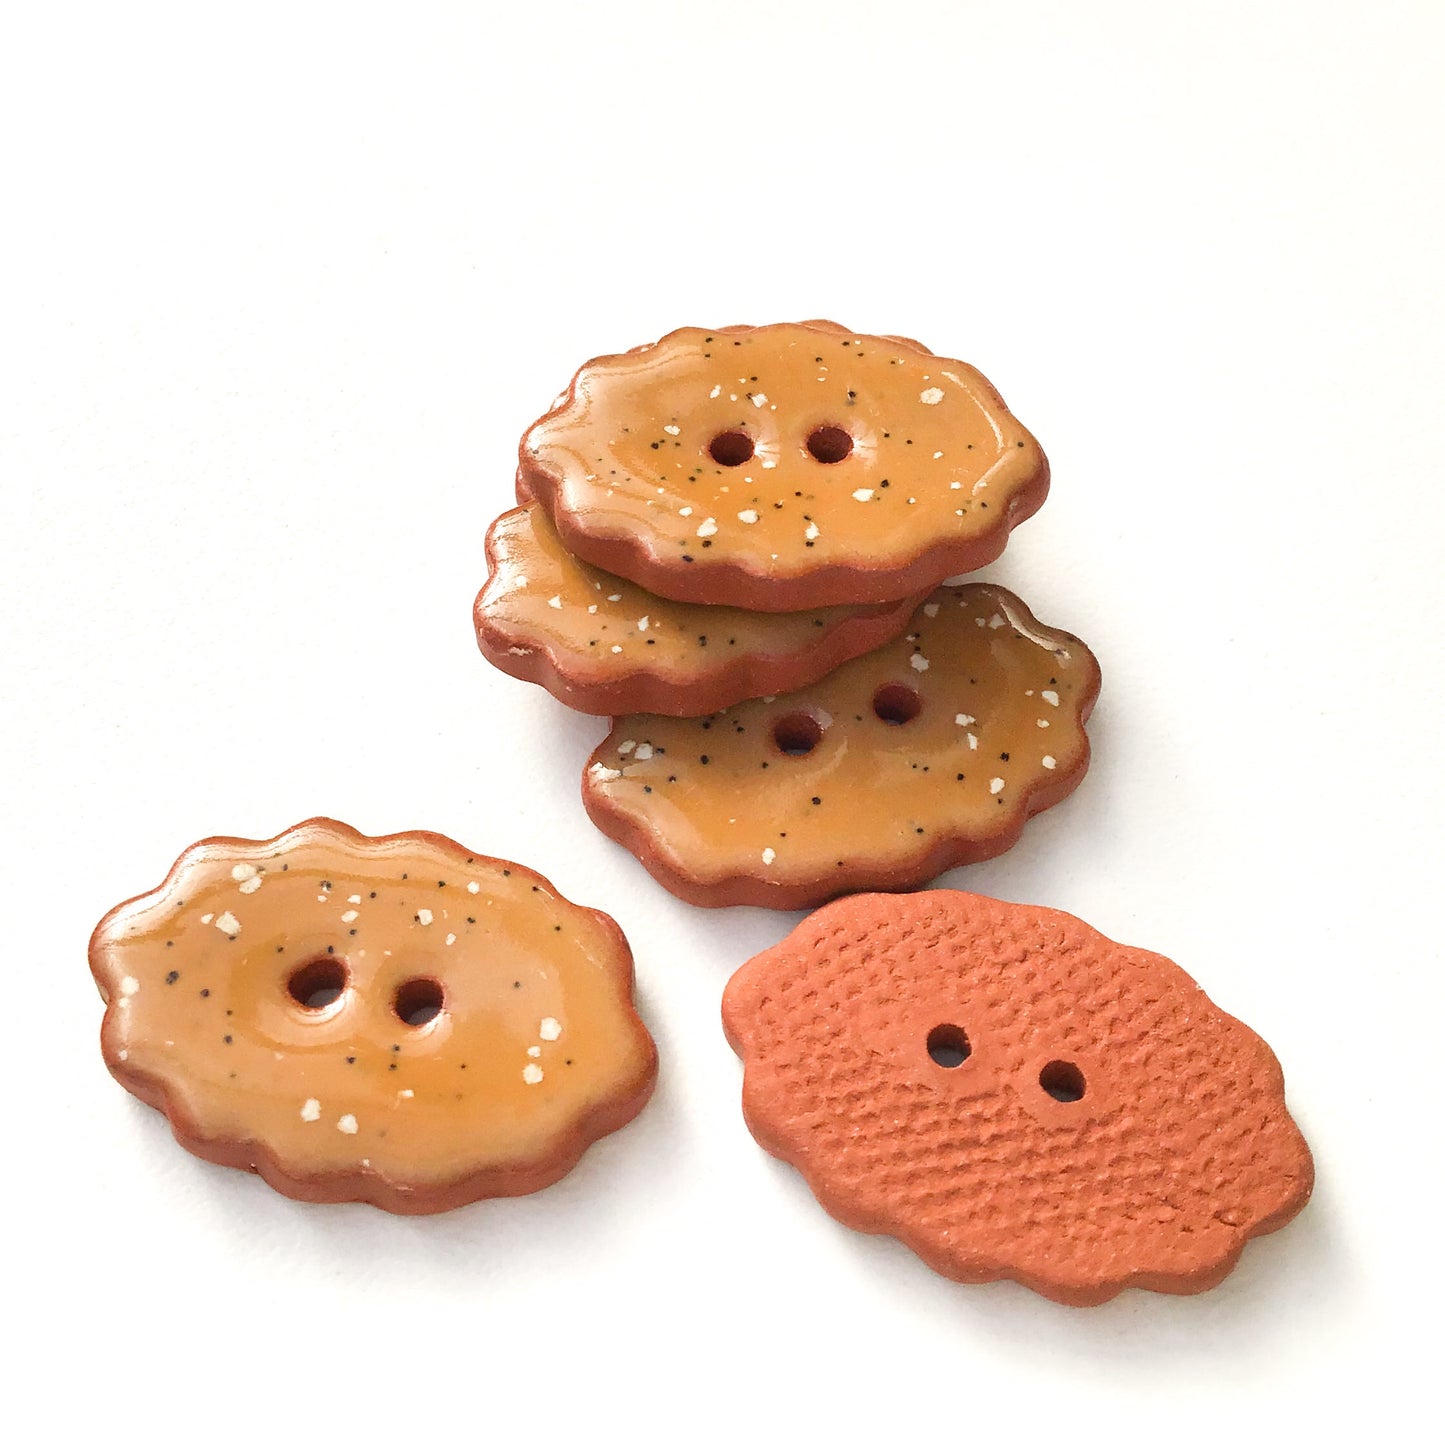 Speckled Brown Ceramic Buttons with Scalloped Edge - Terracotta Clay - 3/4" x 1" - 6 Pack